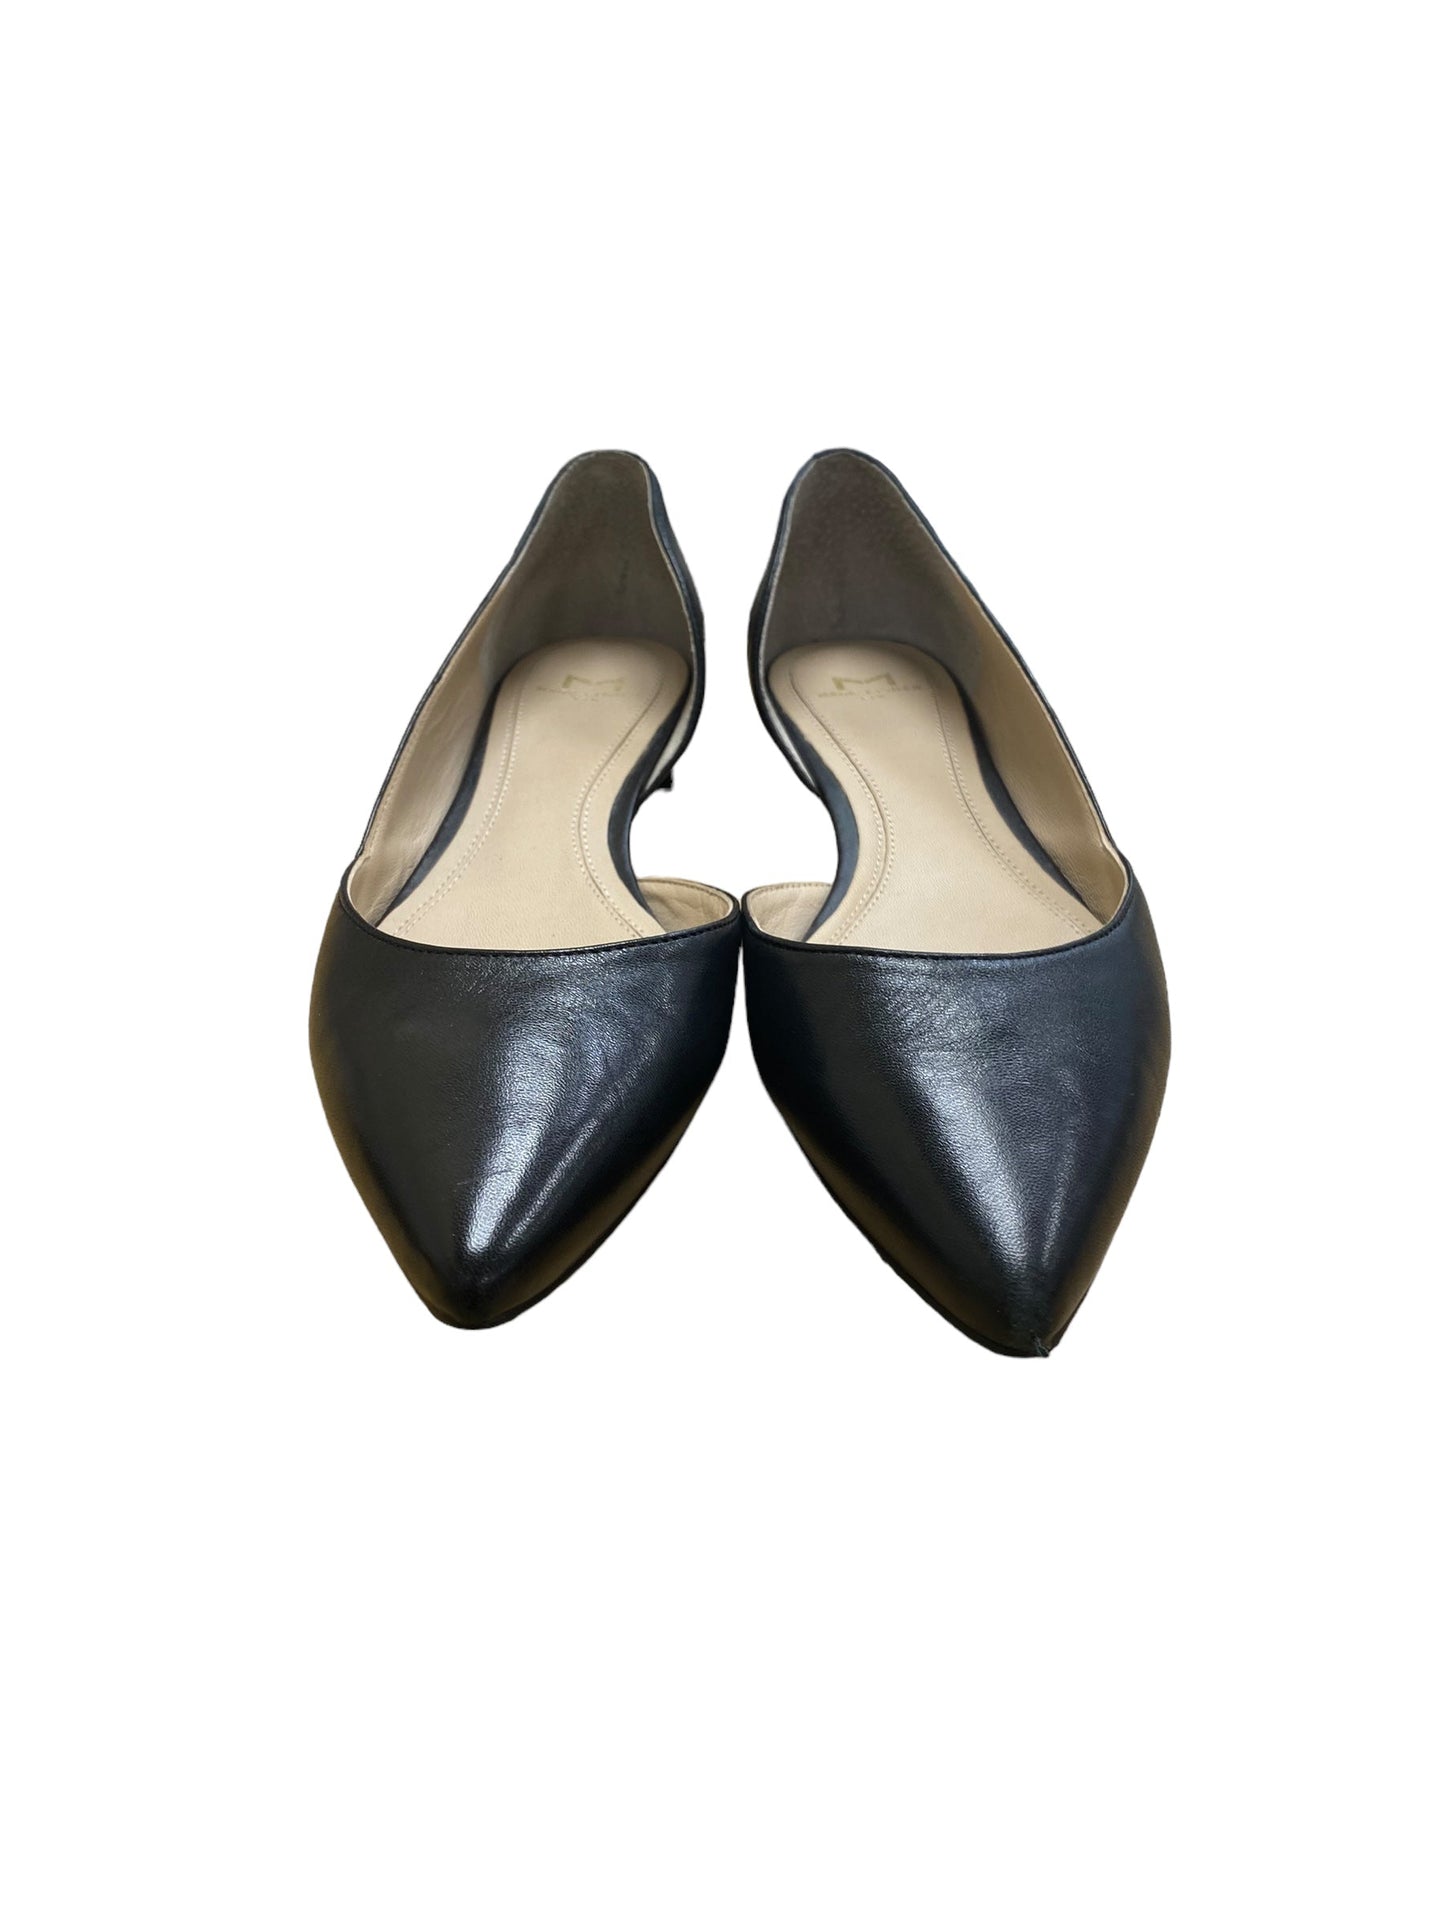 Black Shoes Flats Marc Fisher, Size 7.5